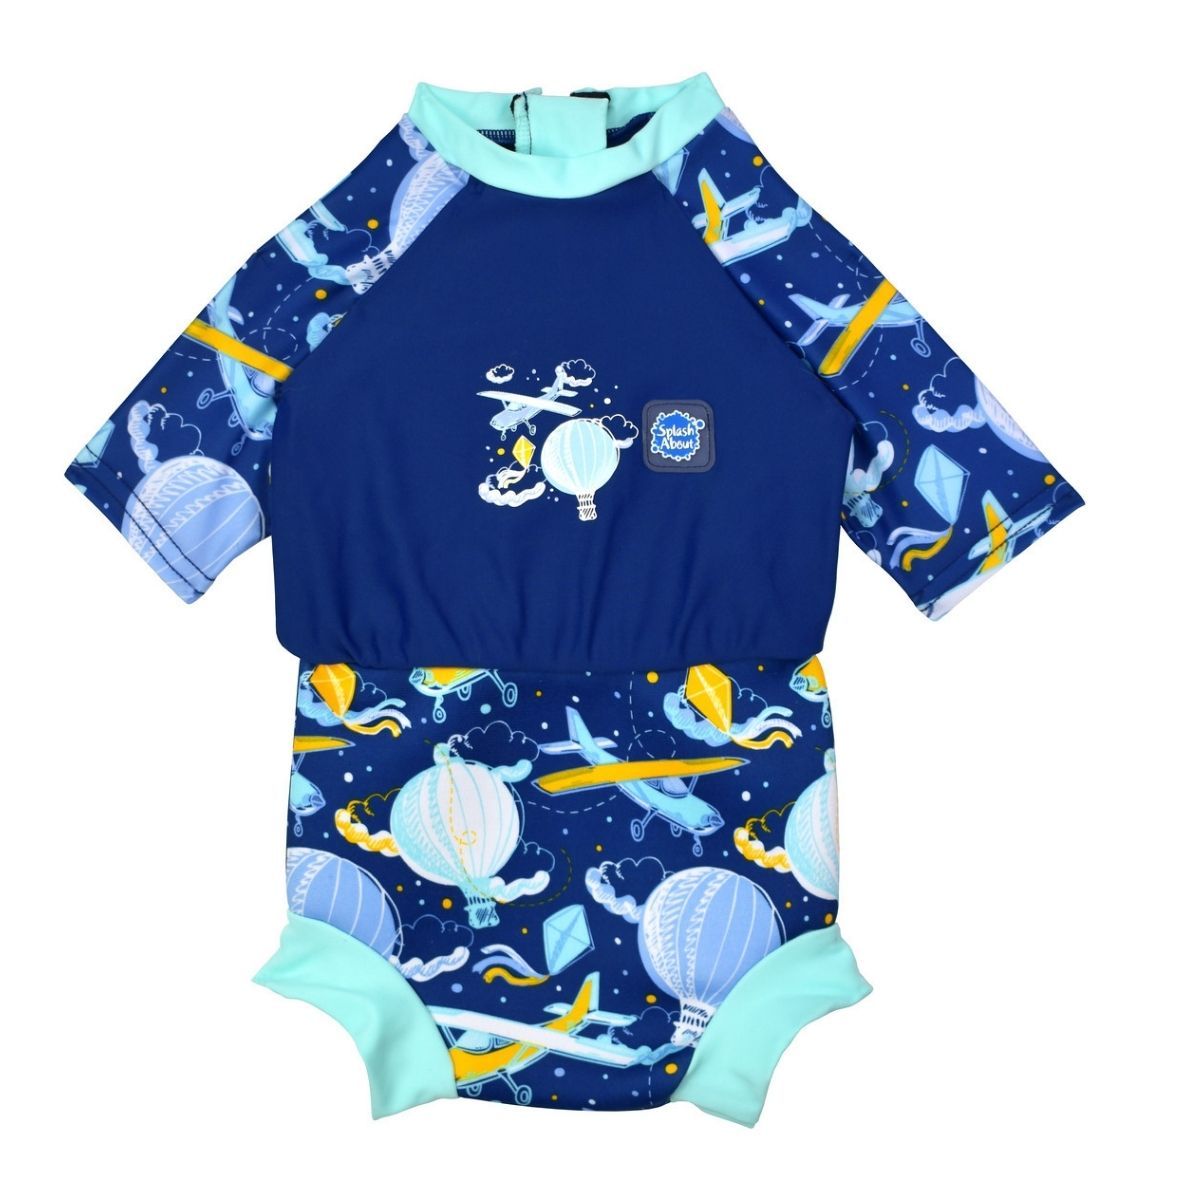 Happy Nappy Sunsuit in navy blue and sky themed print, including airplanes, kites, clouds and hot air balloons. Front.